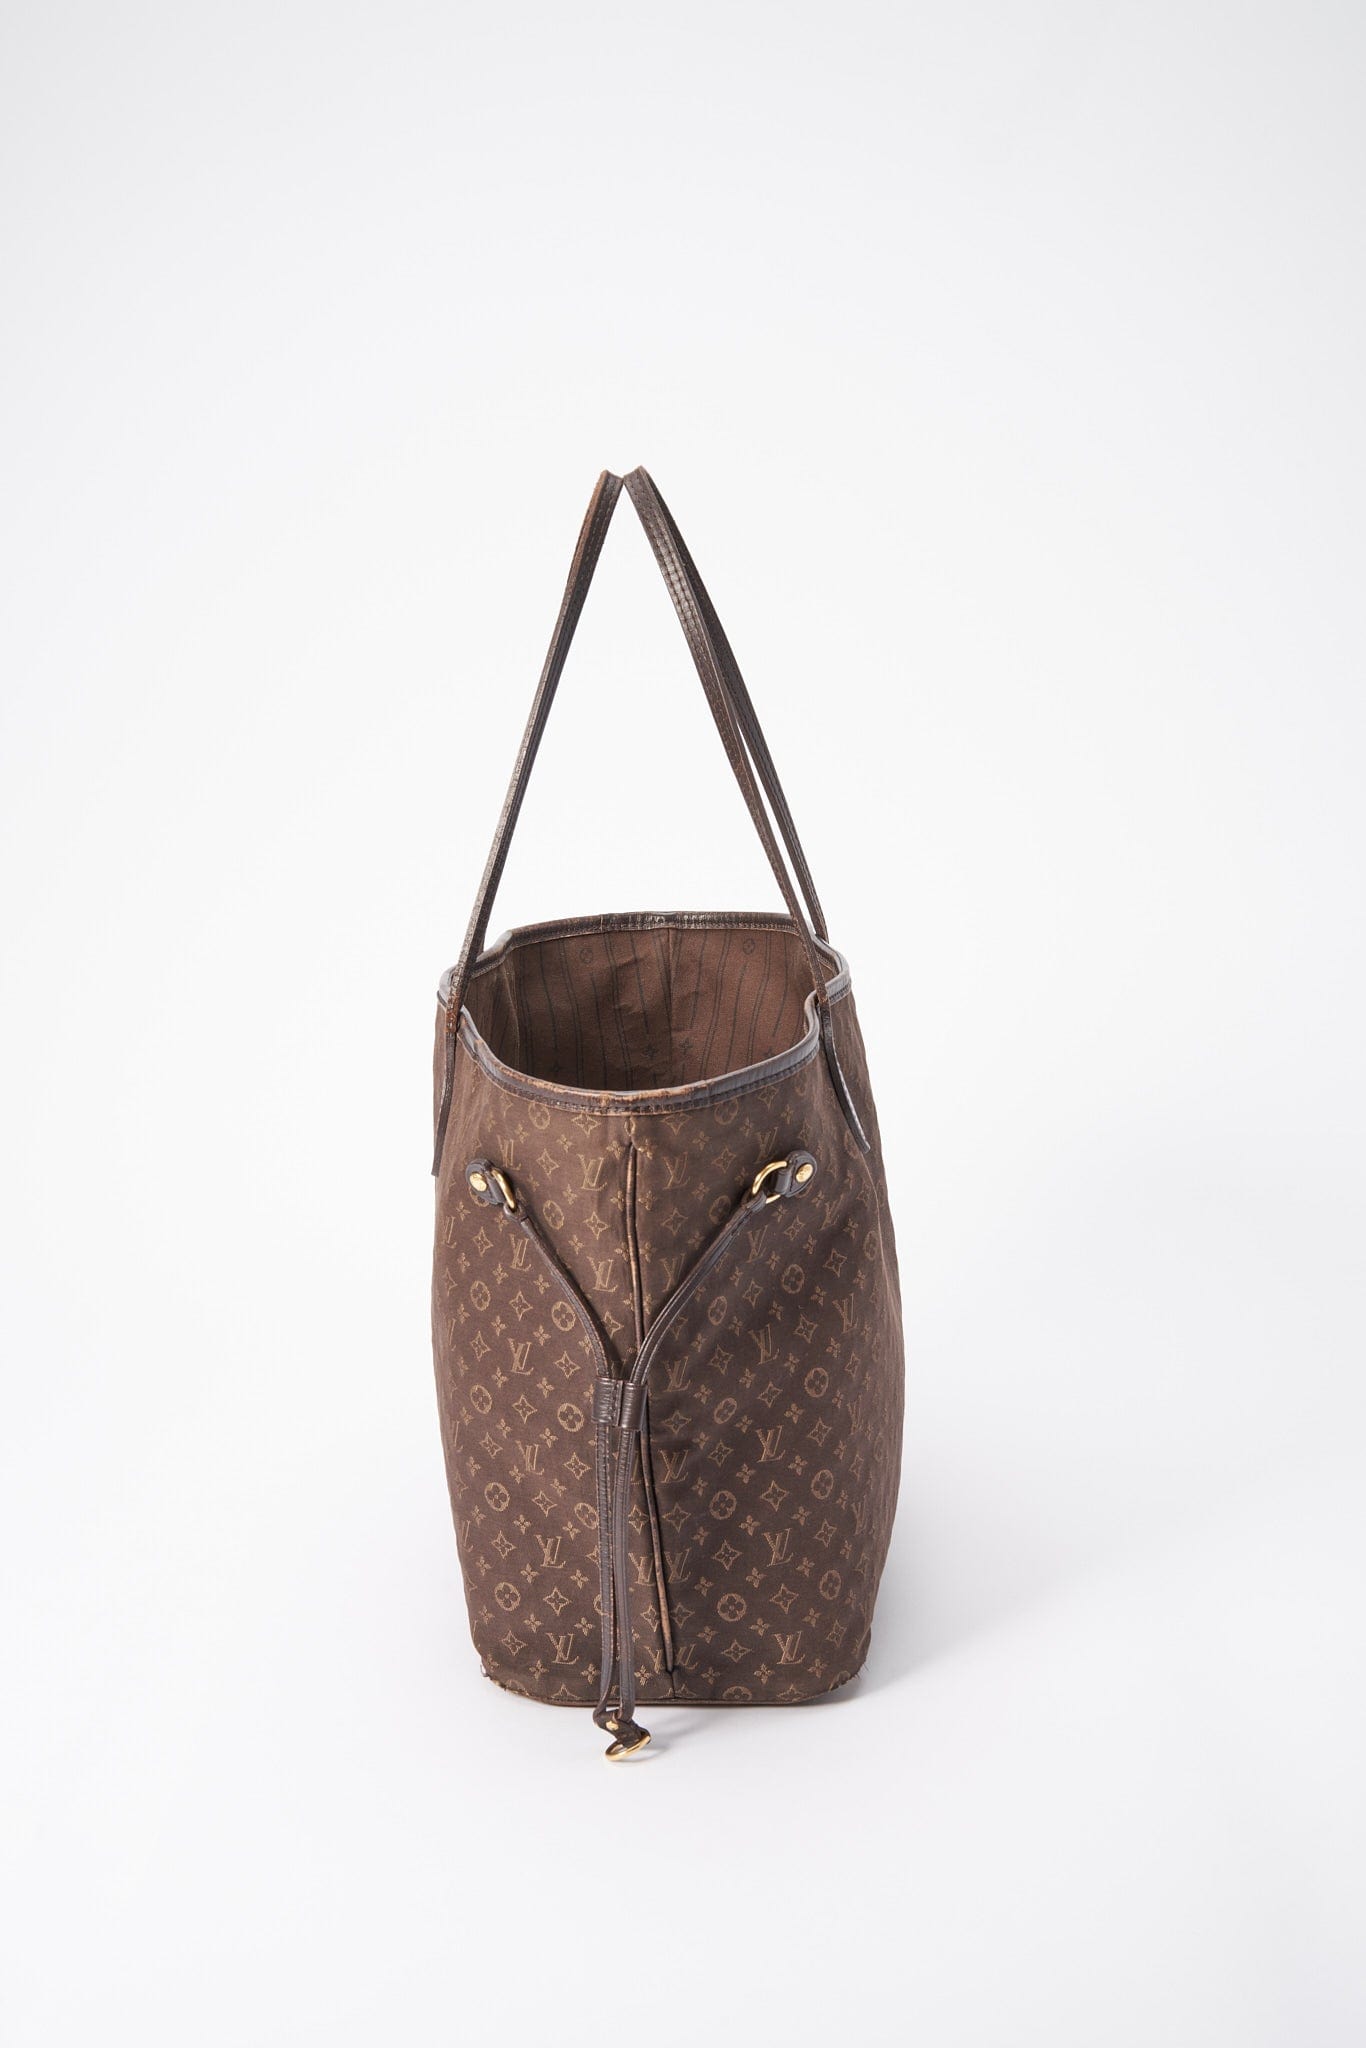 Louis Vuitton Neverfull Tote MM Beige Canvas for sale online